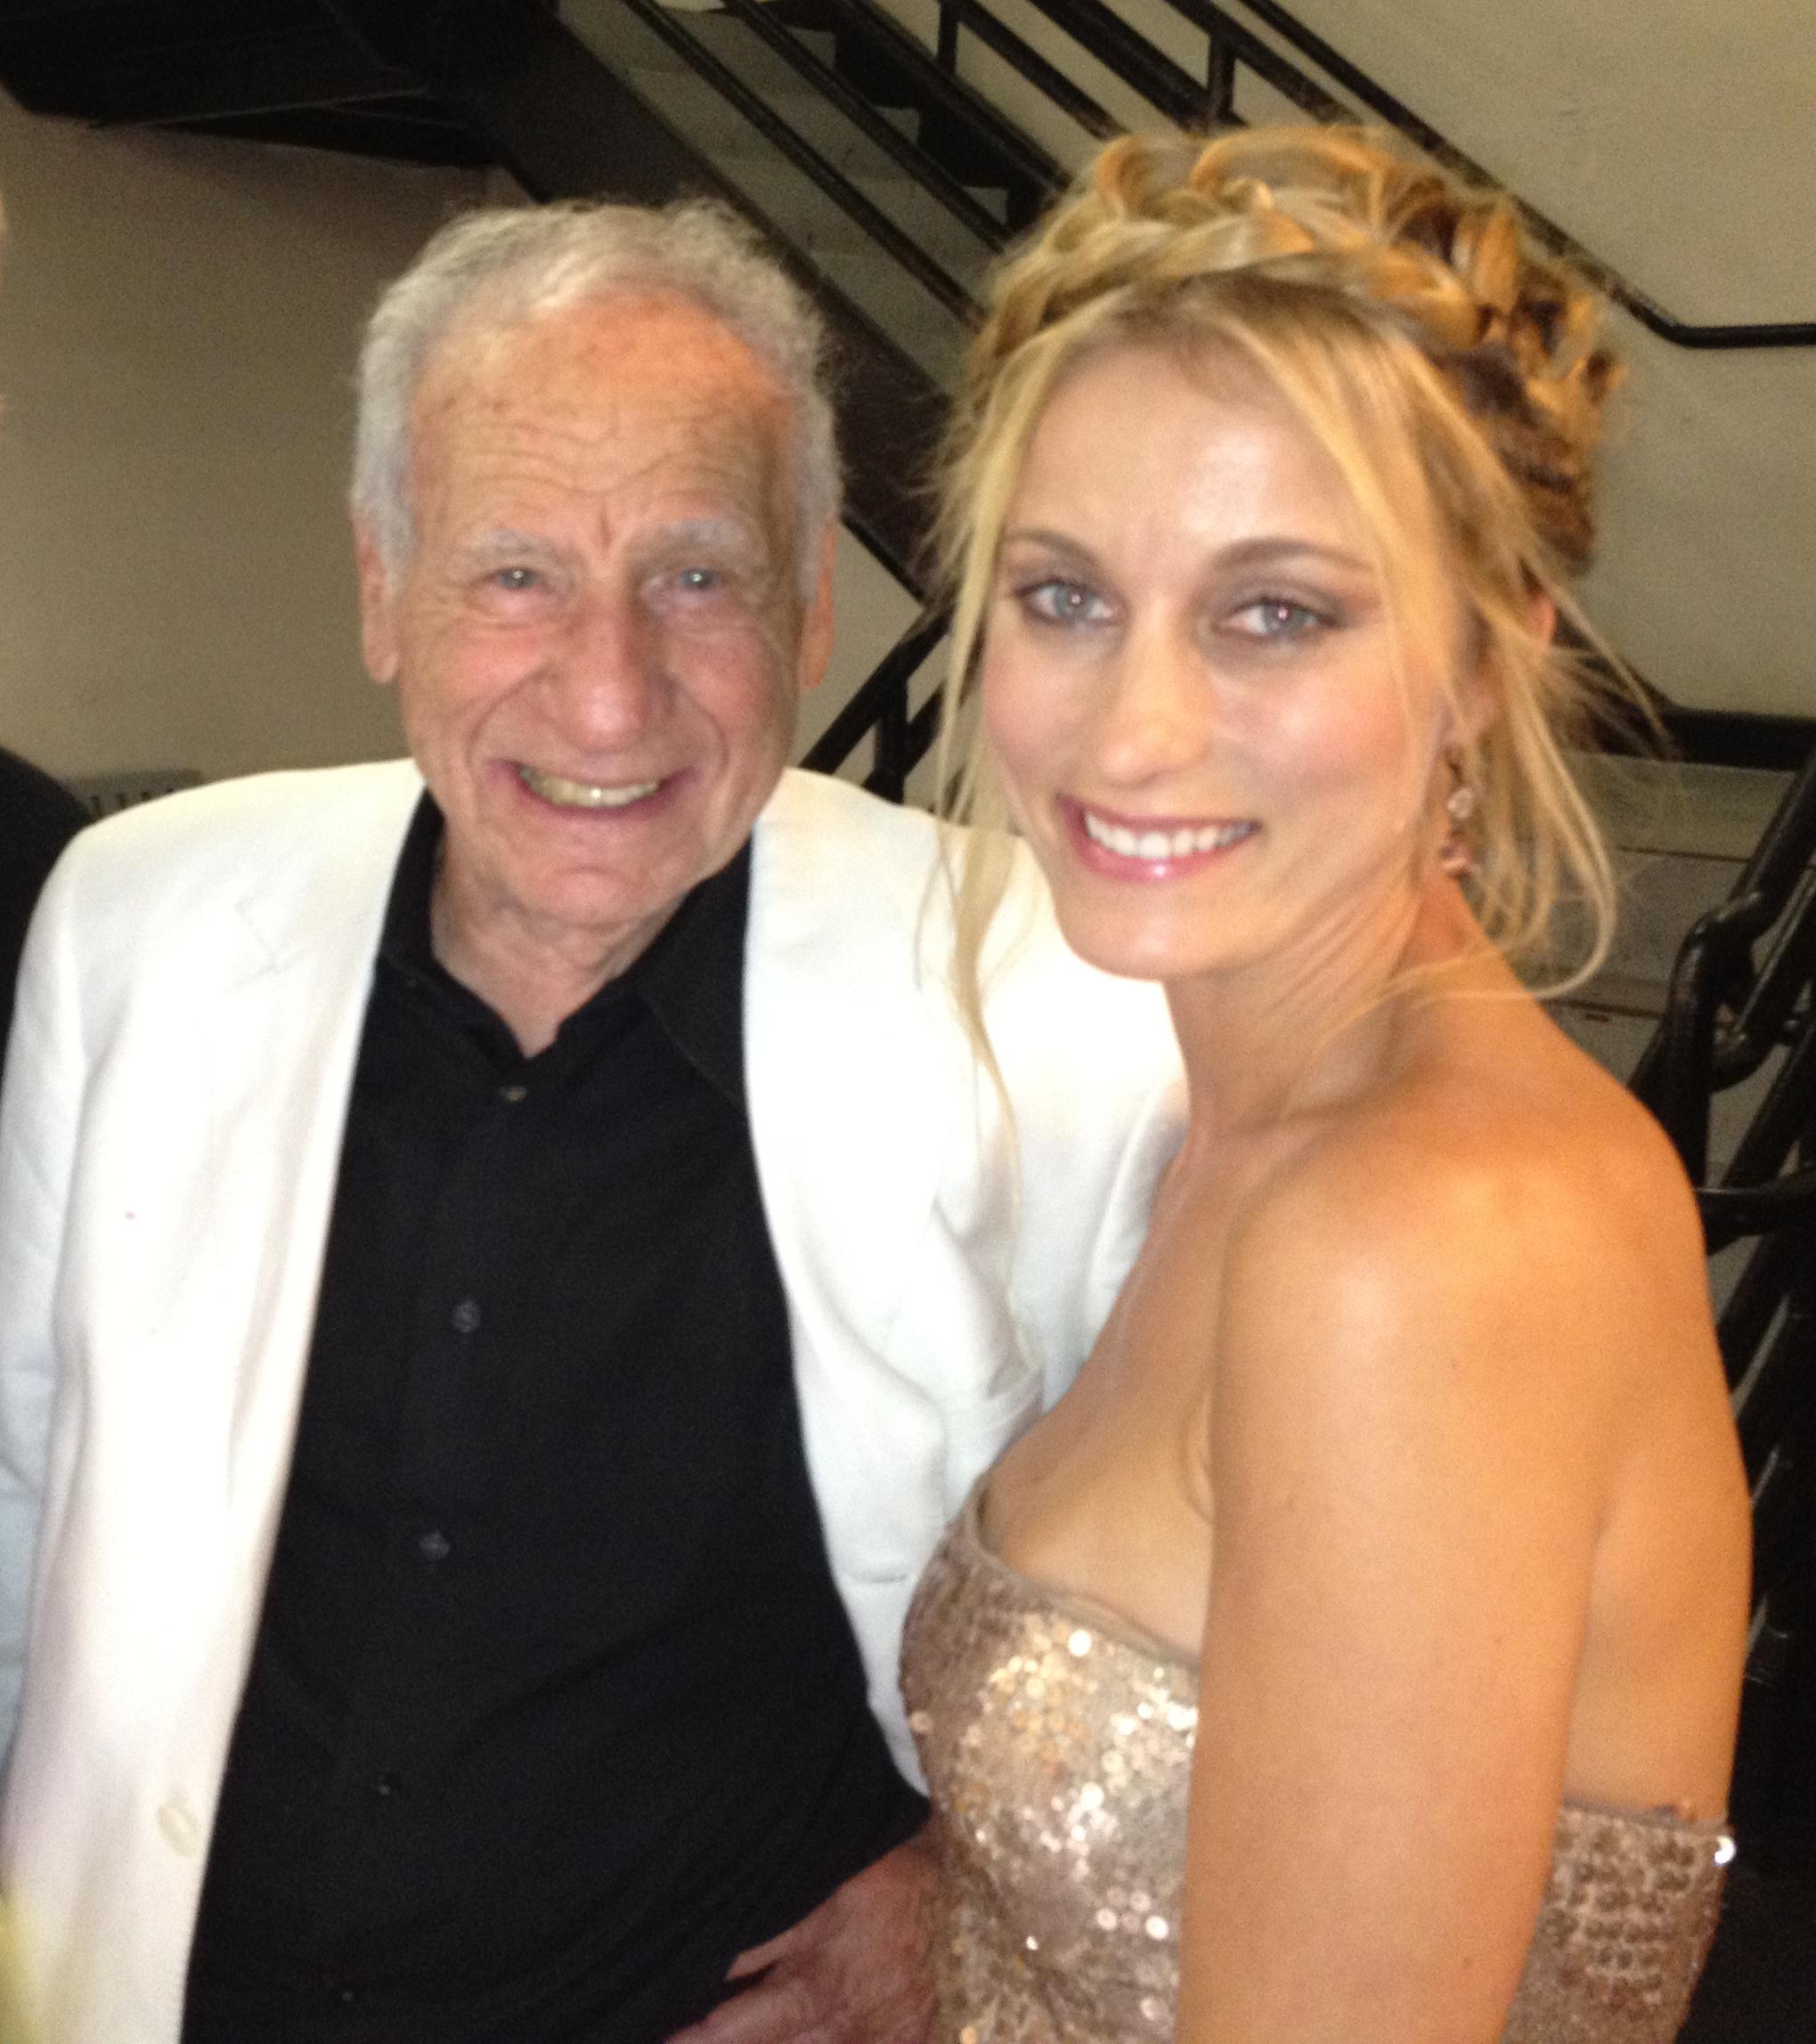 Mel Brooks & I at HBO Emmy afterparty 2012